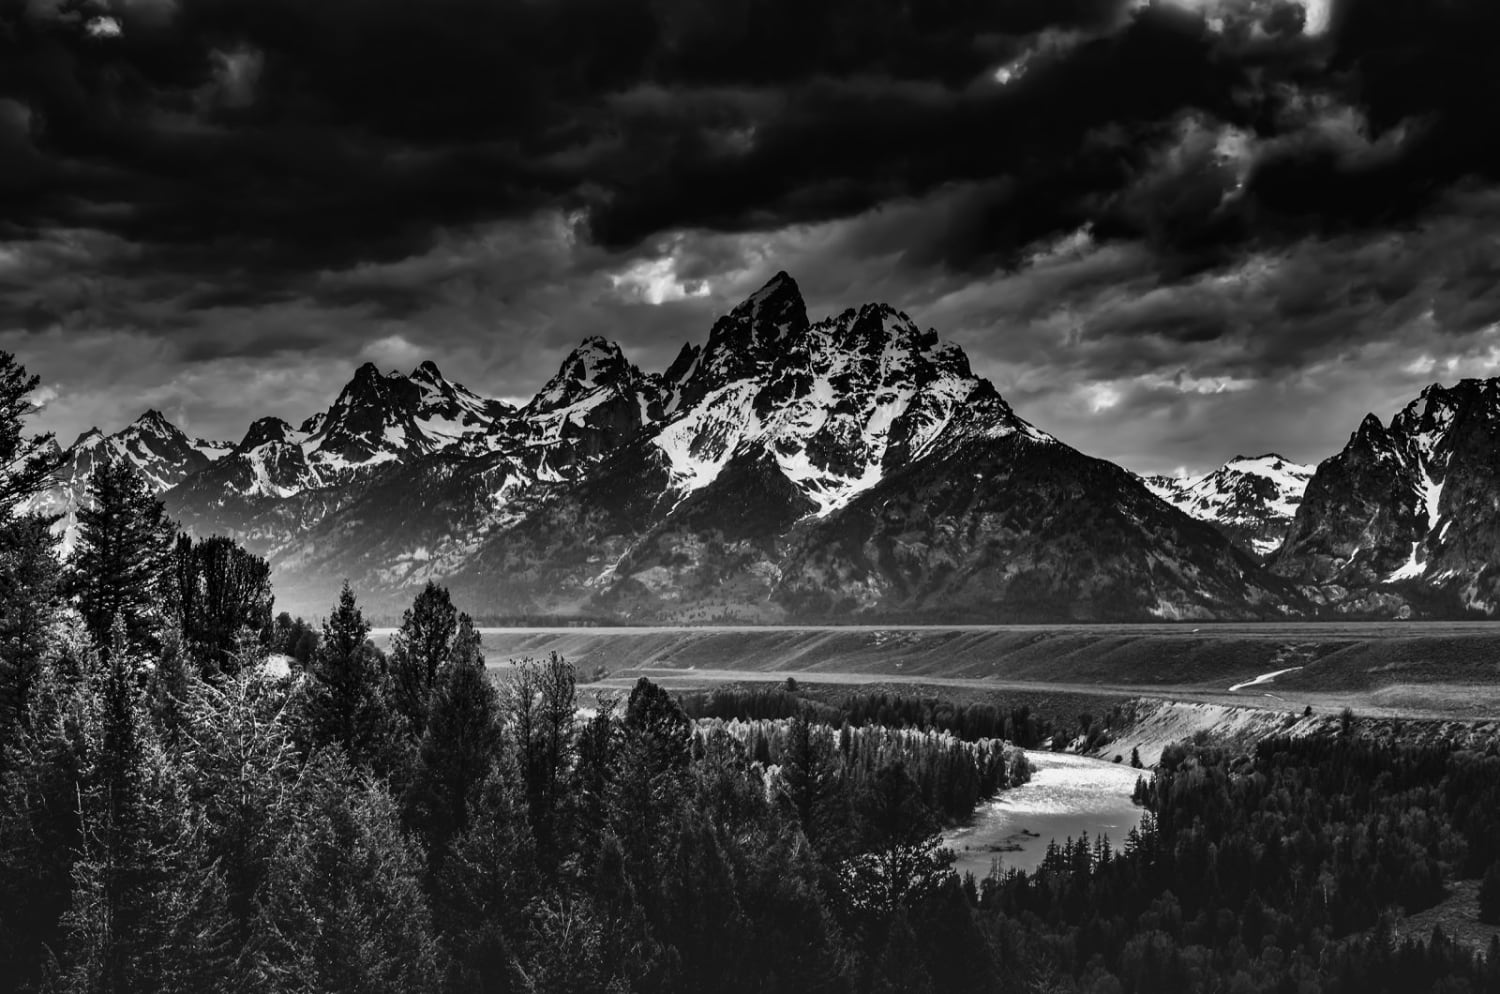 Enter The 2019 Great Outdoors Photo Contest! Get your scenic imagery featured in Outdoor Photographer and win prizes provided by Tamron, SKB, Zeiss and more...Check out former submission, "Grand Teton and Snake River" by Edward Snow!